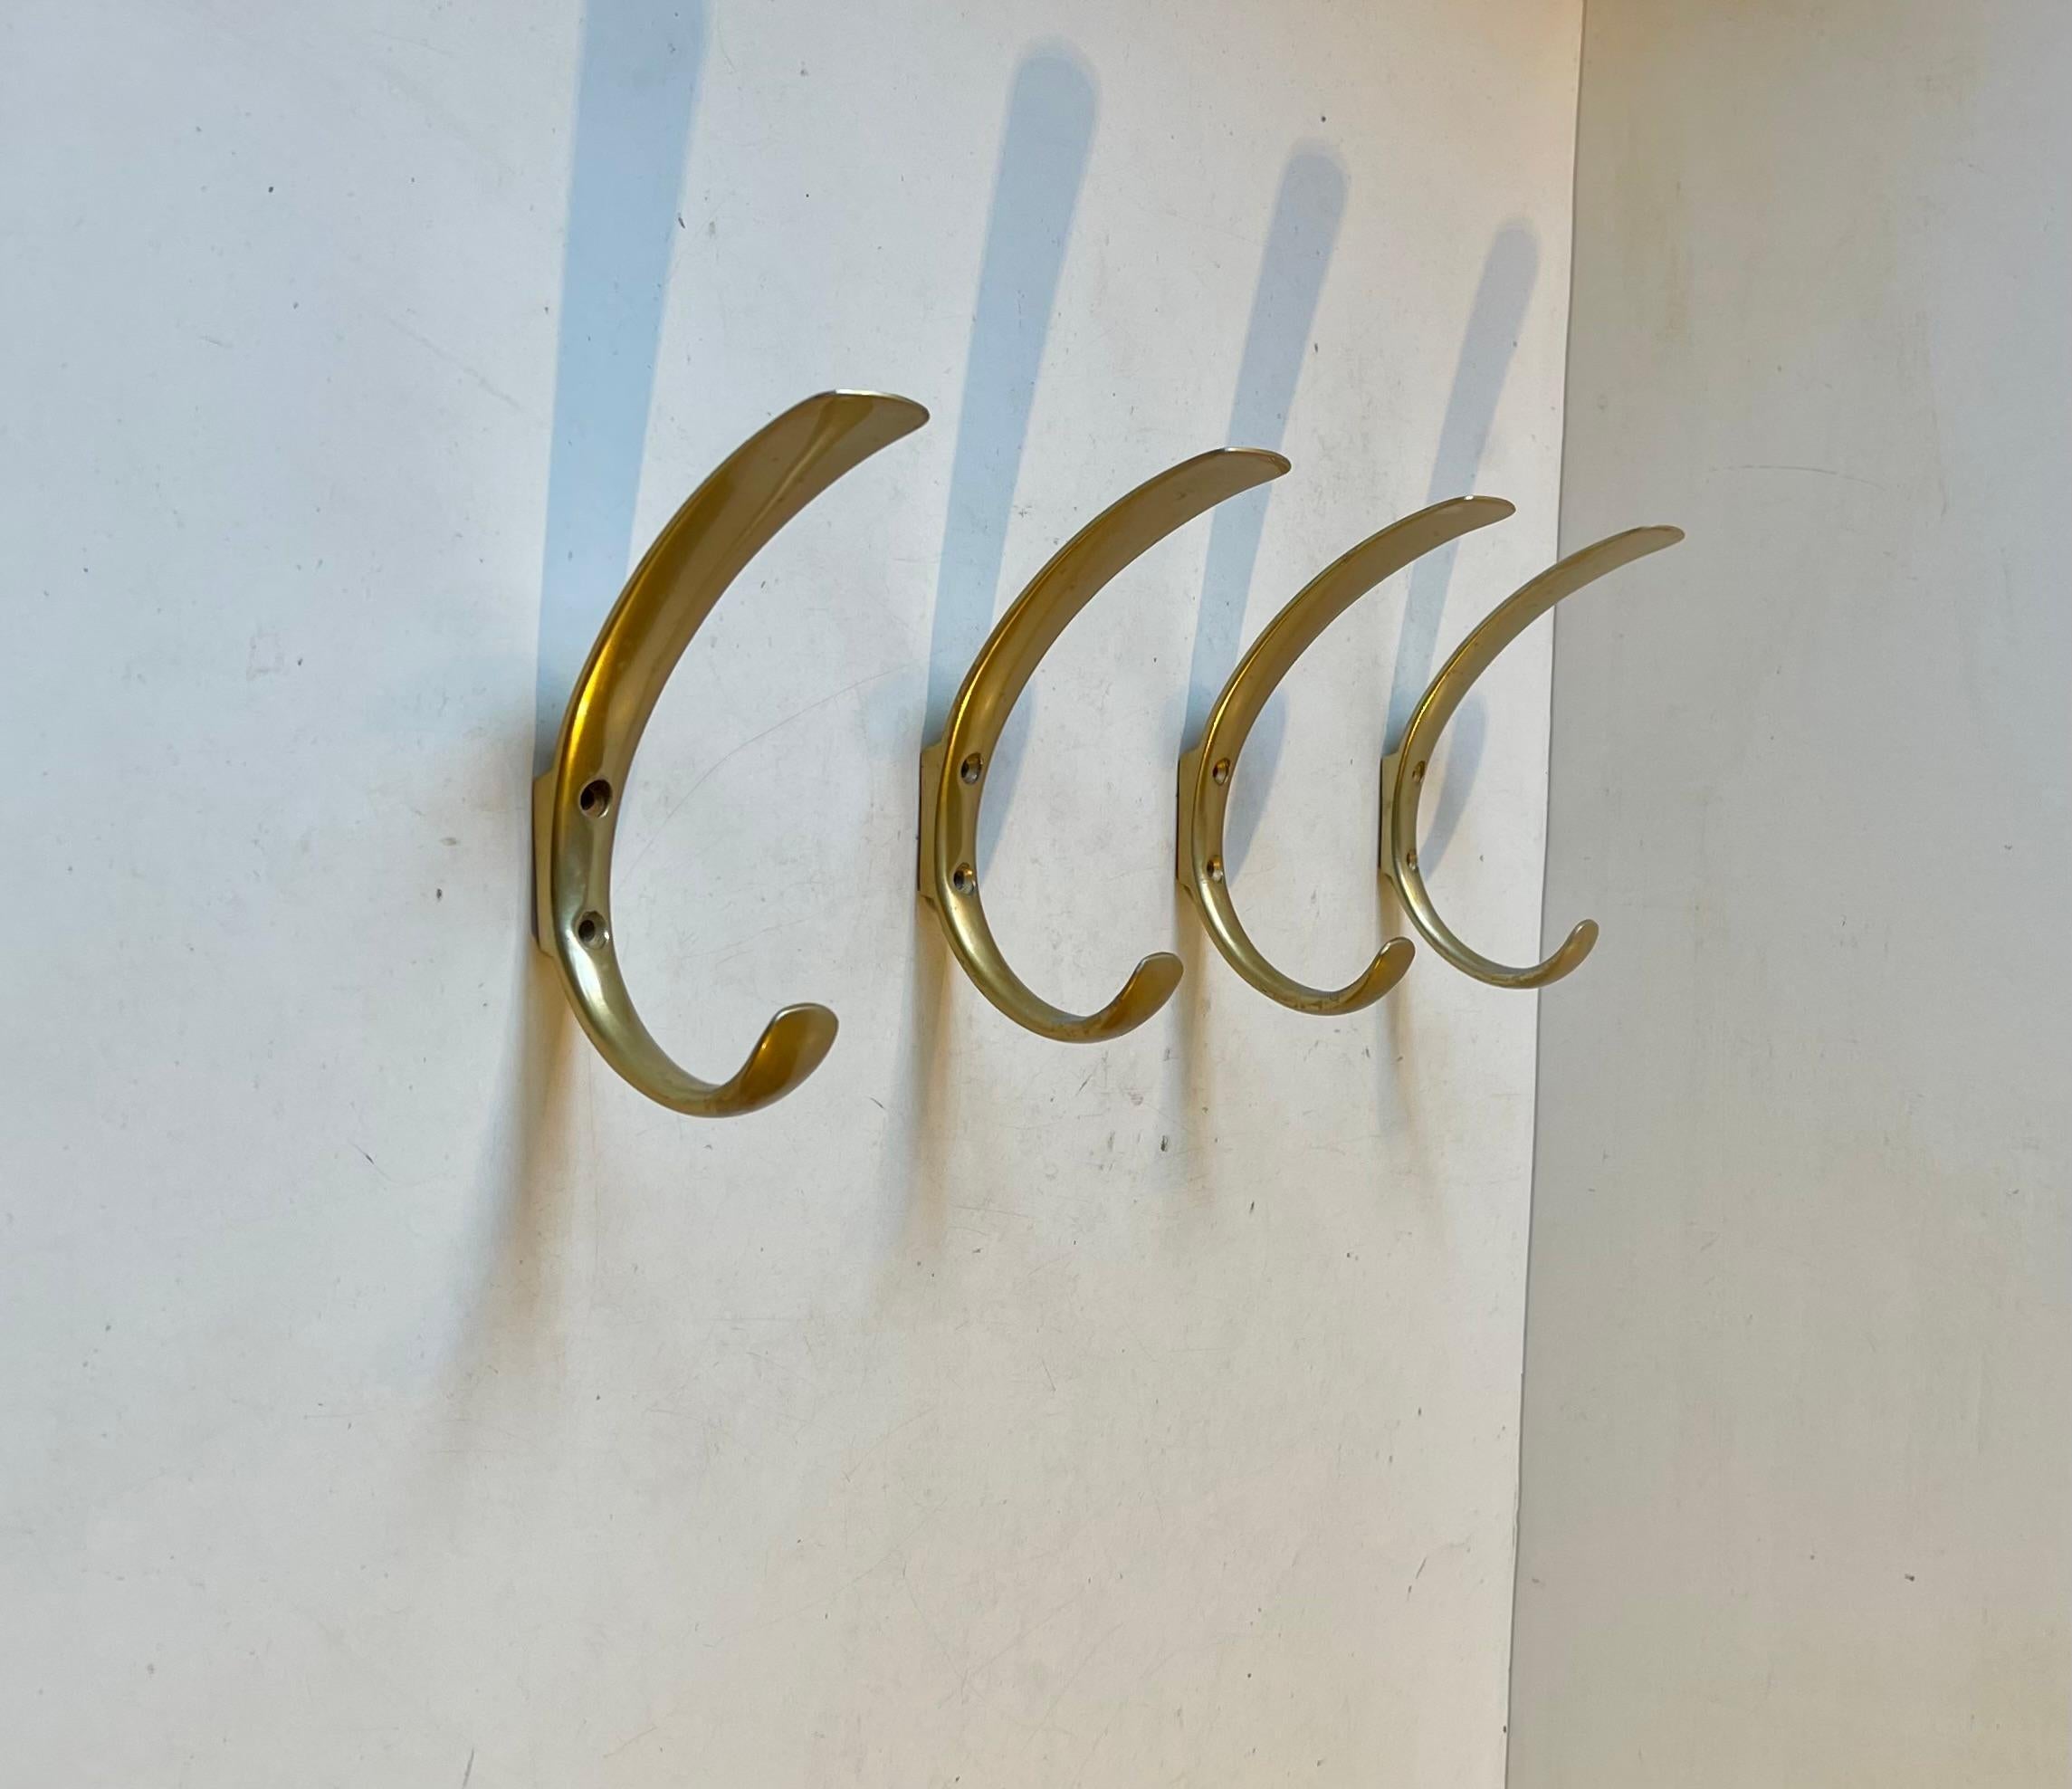 A set of 4 Scandinavian Midcentury Coat hooks for 'personalized' wall mount according to your preferences. Sleek concave organic shape. Two hanging options above/below. They are made from anodized aluminum mimic'ing brass. Made in Scandinavia circa